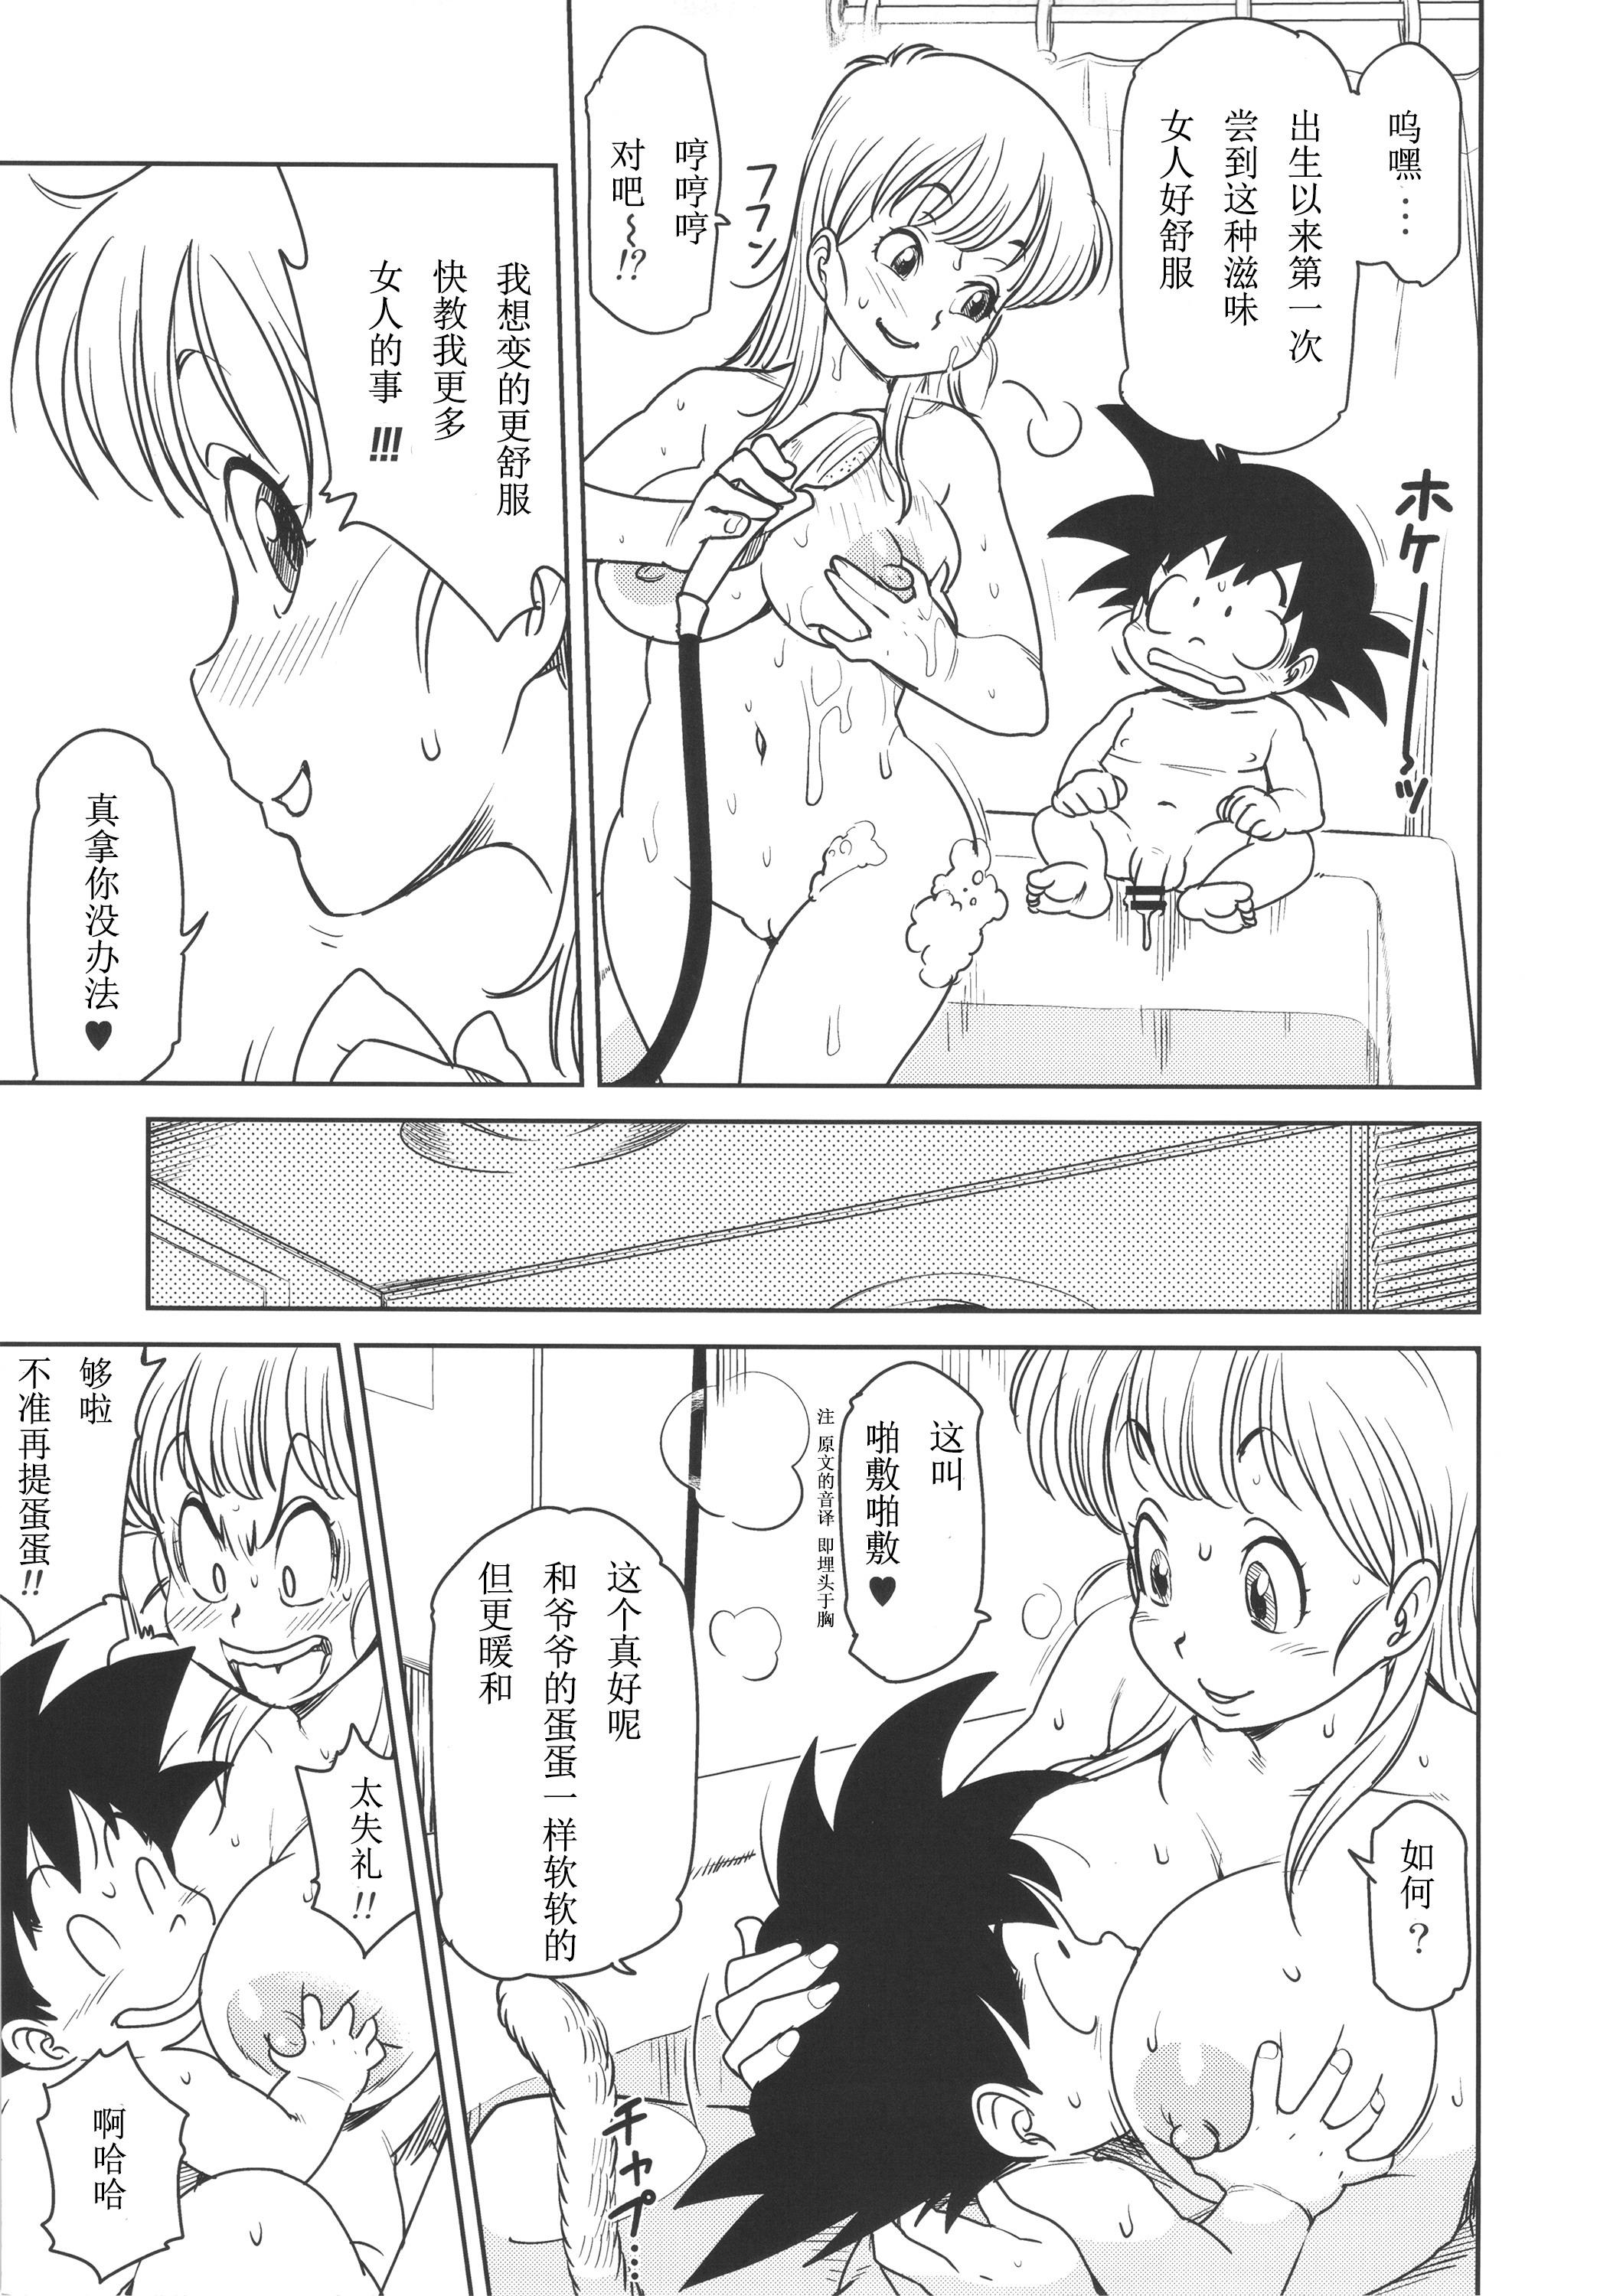 Eromangirl Page 8 Of 24 dragon ball hentai haven, Eromangirl Page 8 Of 24 d...